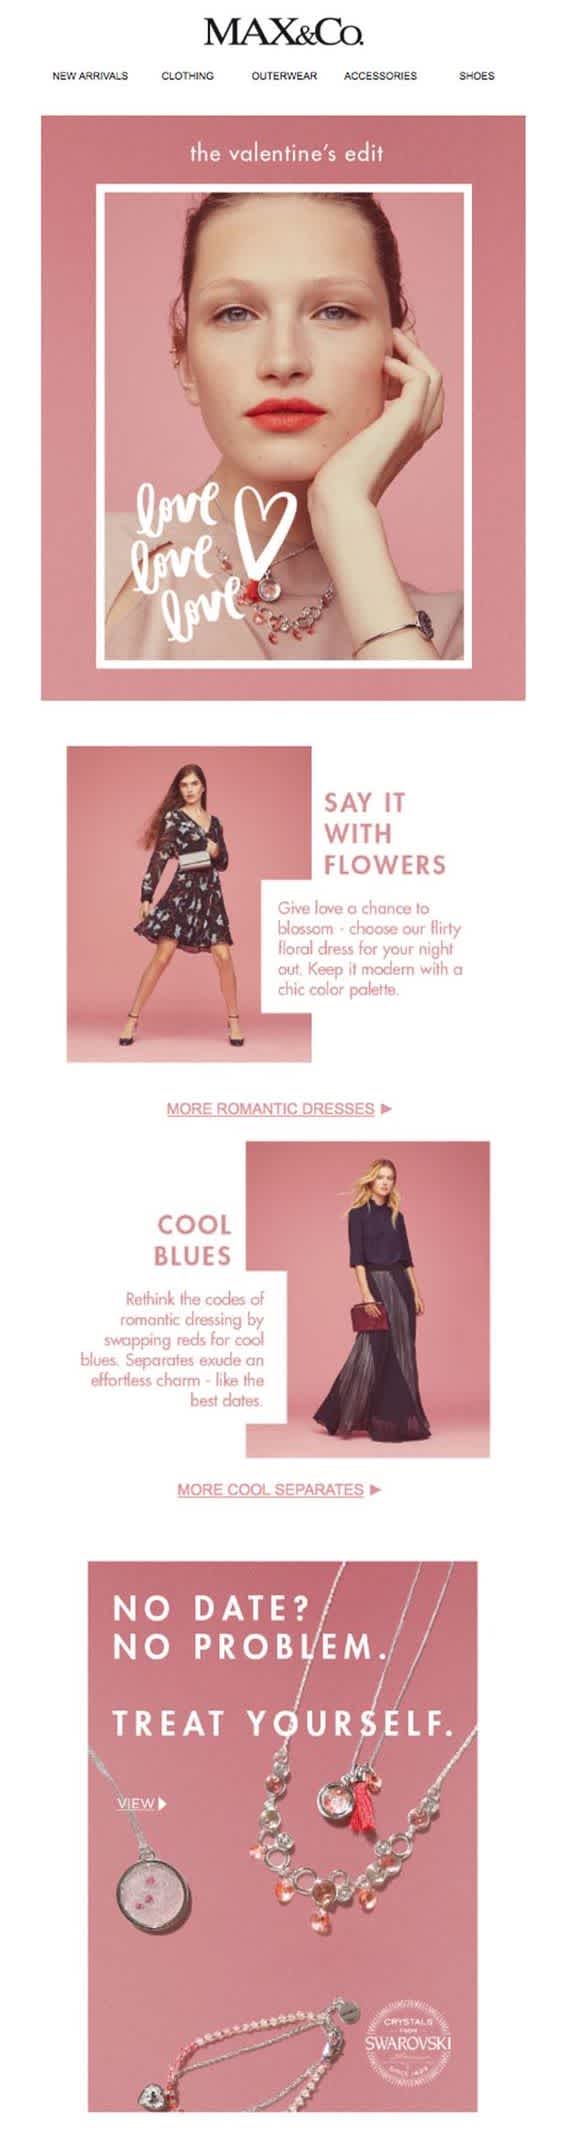 Max&Co’s pink campaign featuring models